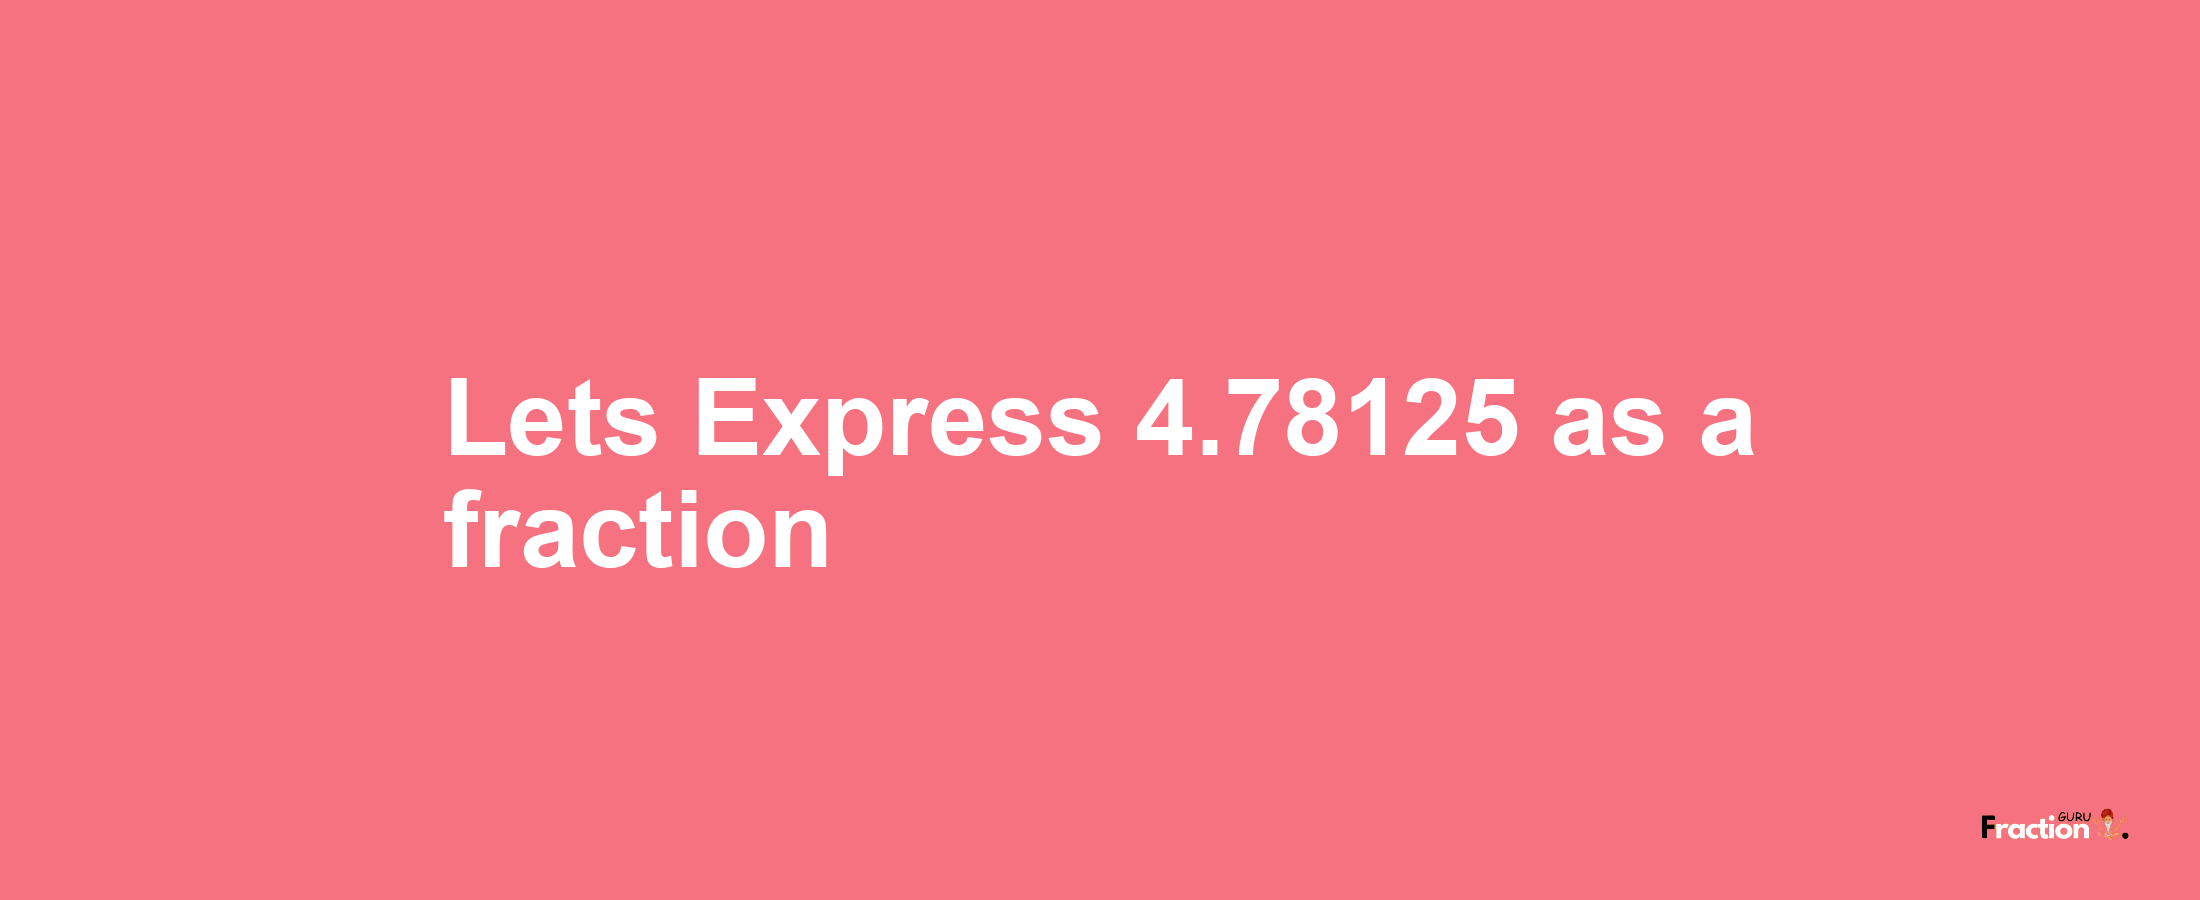 Lets Express 4.78125 as afraction